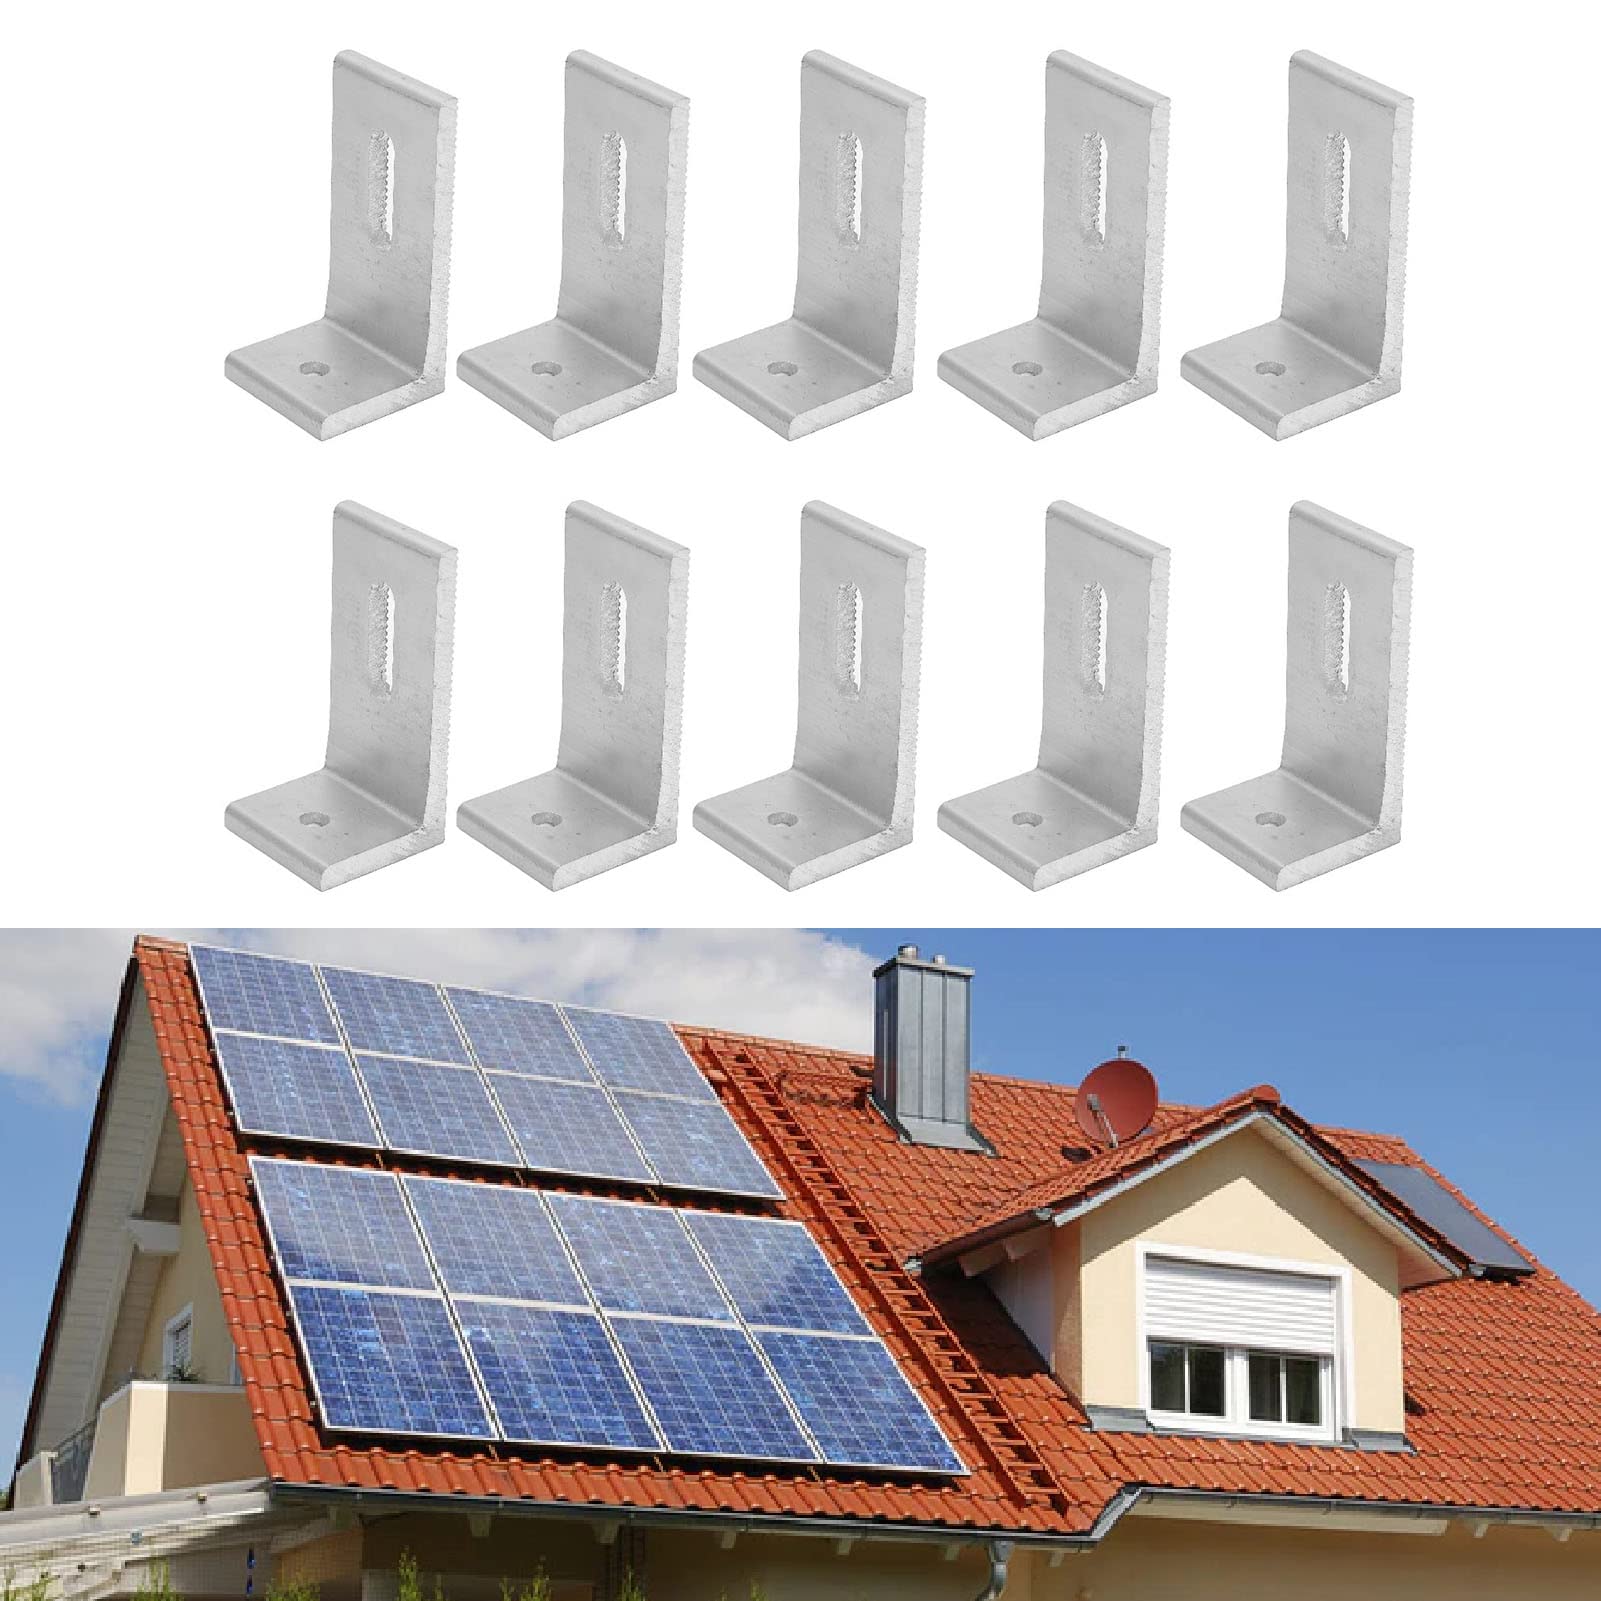 10Pcs Solar Mount L Foot Aluminum Alloy Panel Bracket, Windproof Waterproof Shockproof Glossy Finish, for Roof PV System